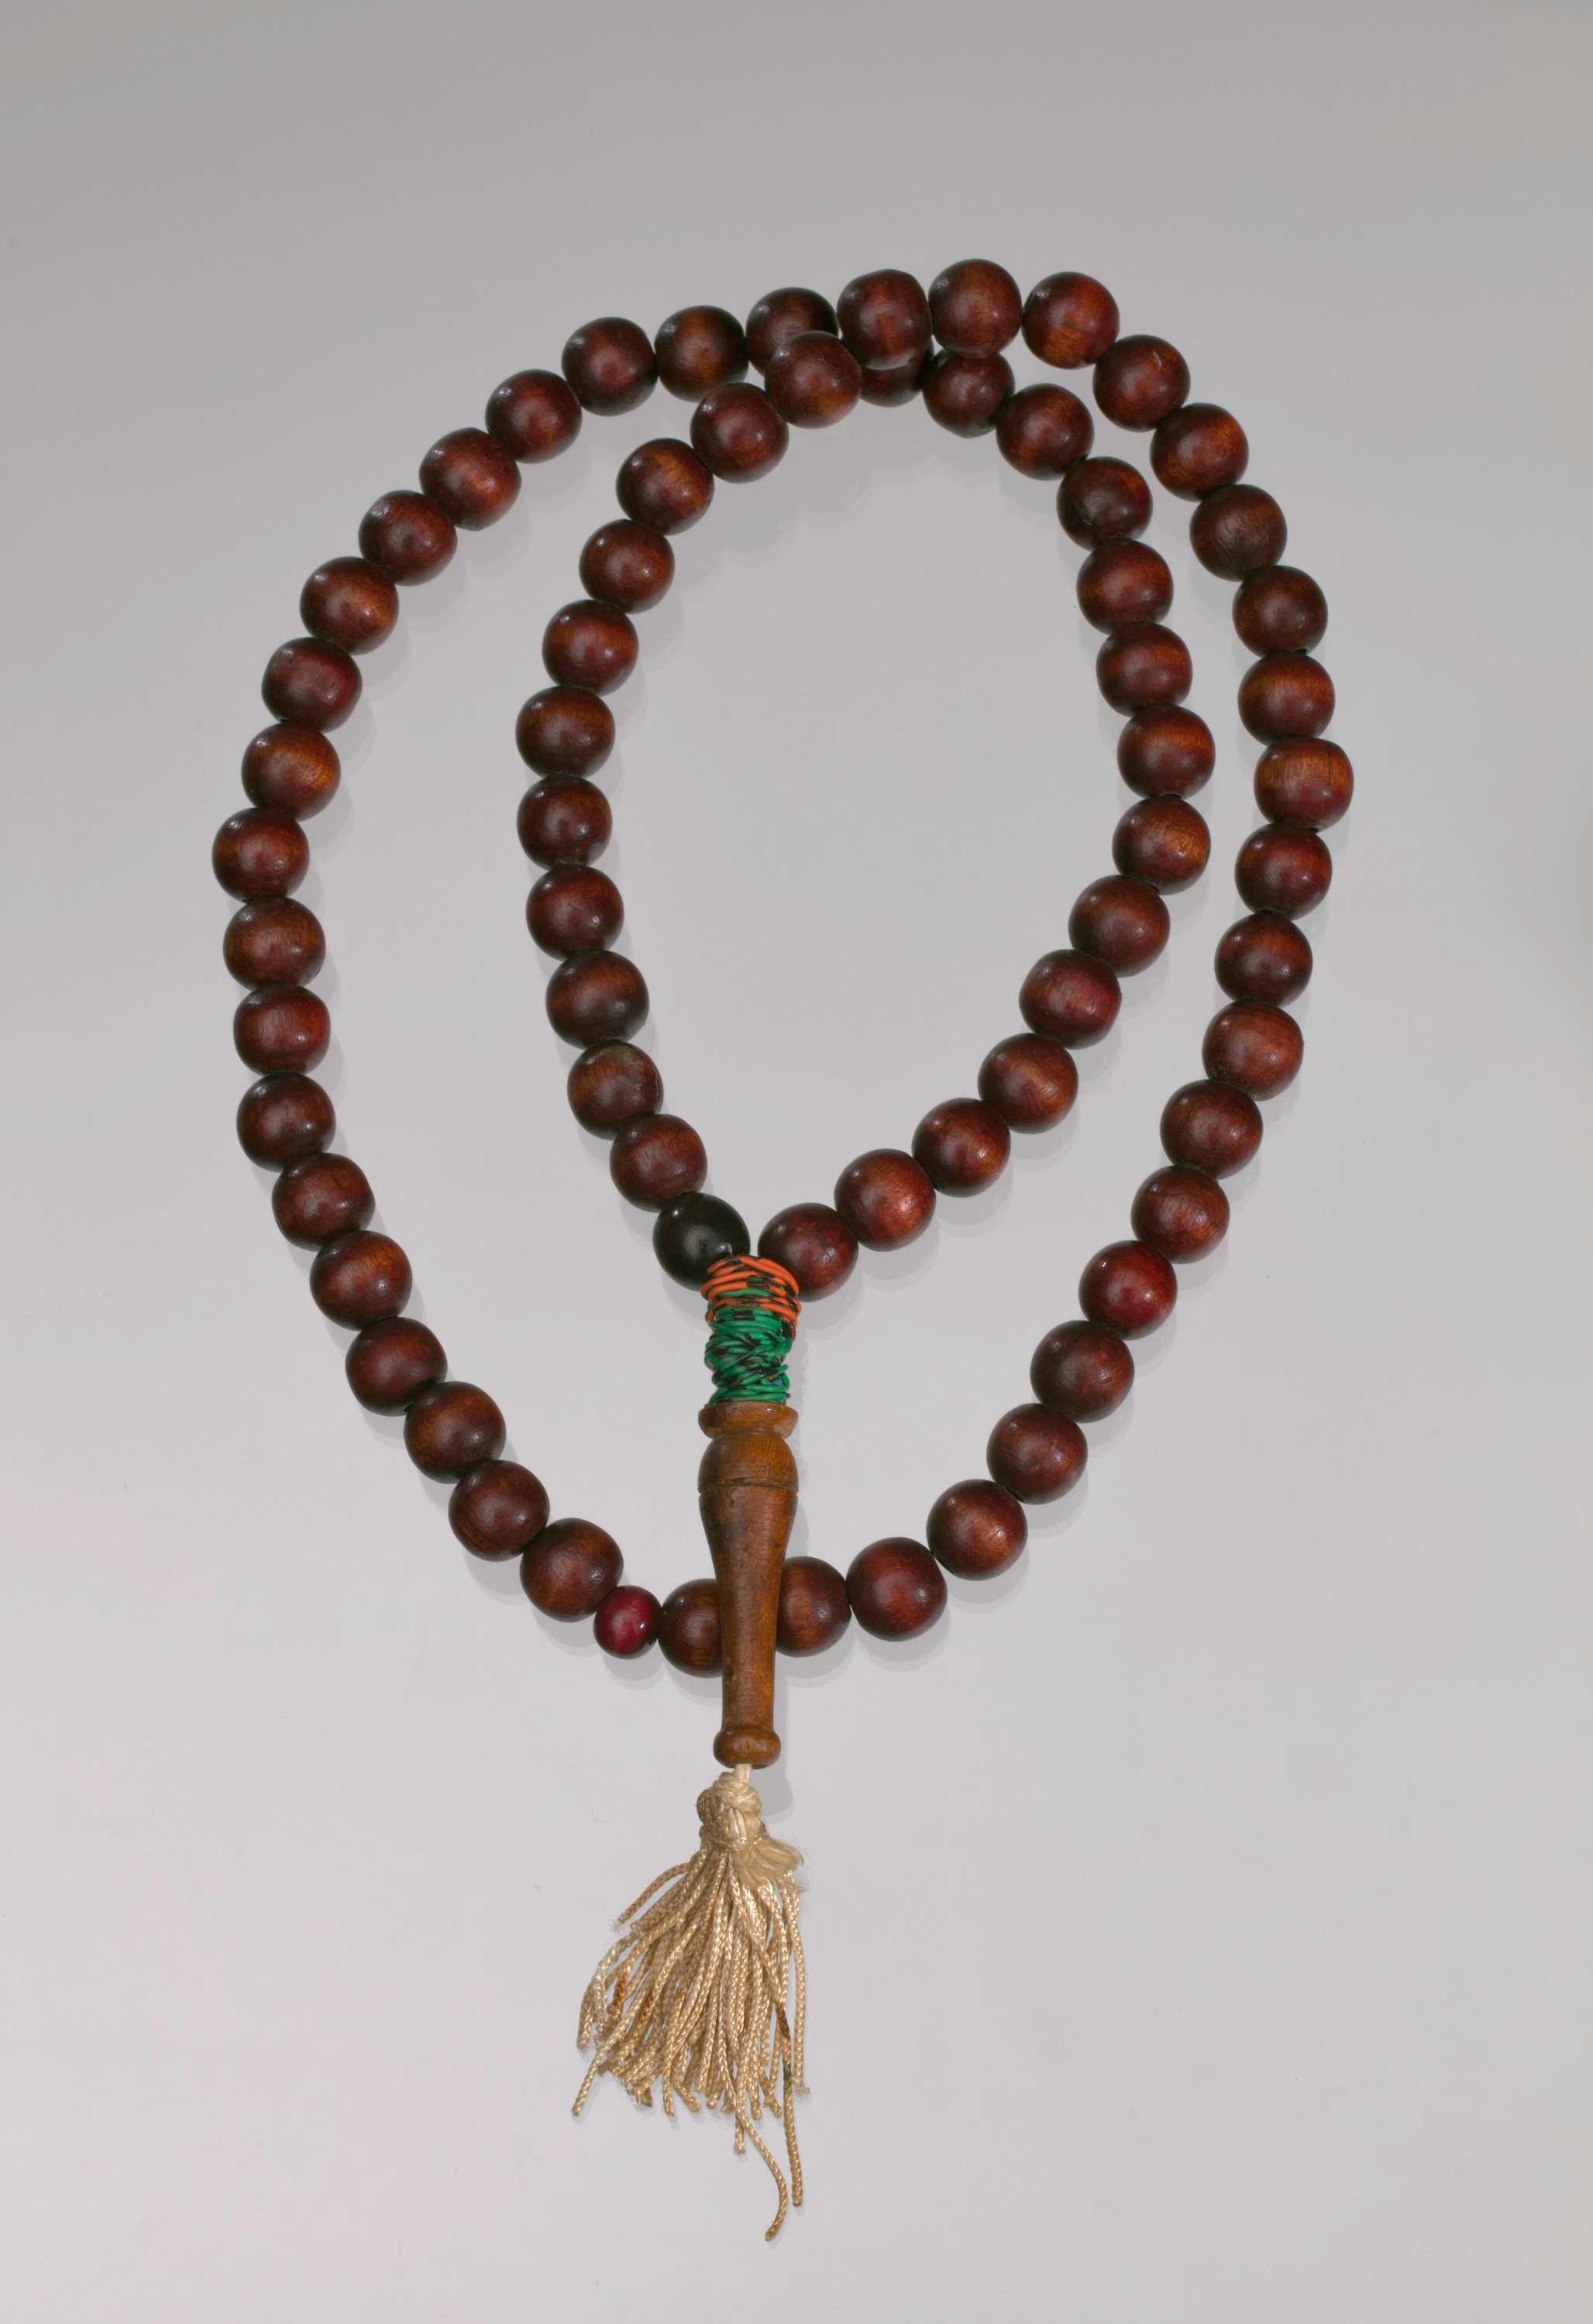 Brown beaded necklace made of 68 round wooden beads. Wood piece with tan tassel at end of necklace. Orange and green wire near tassel.